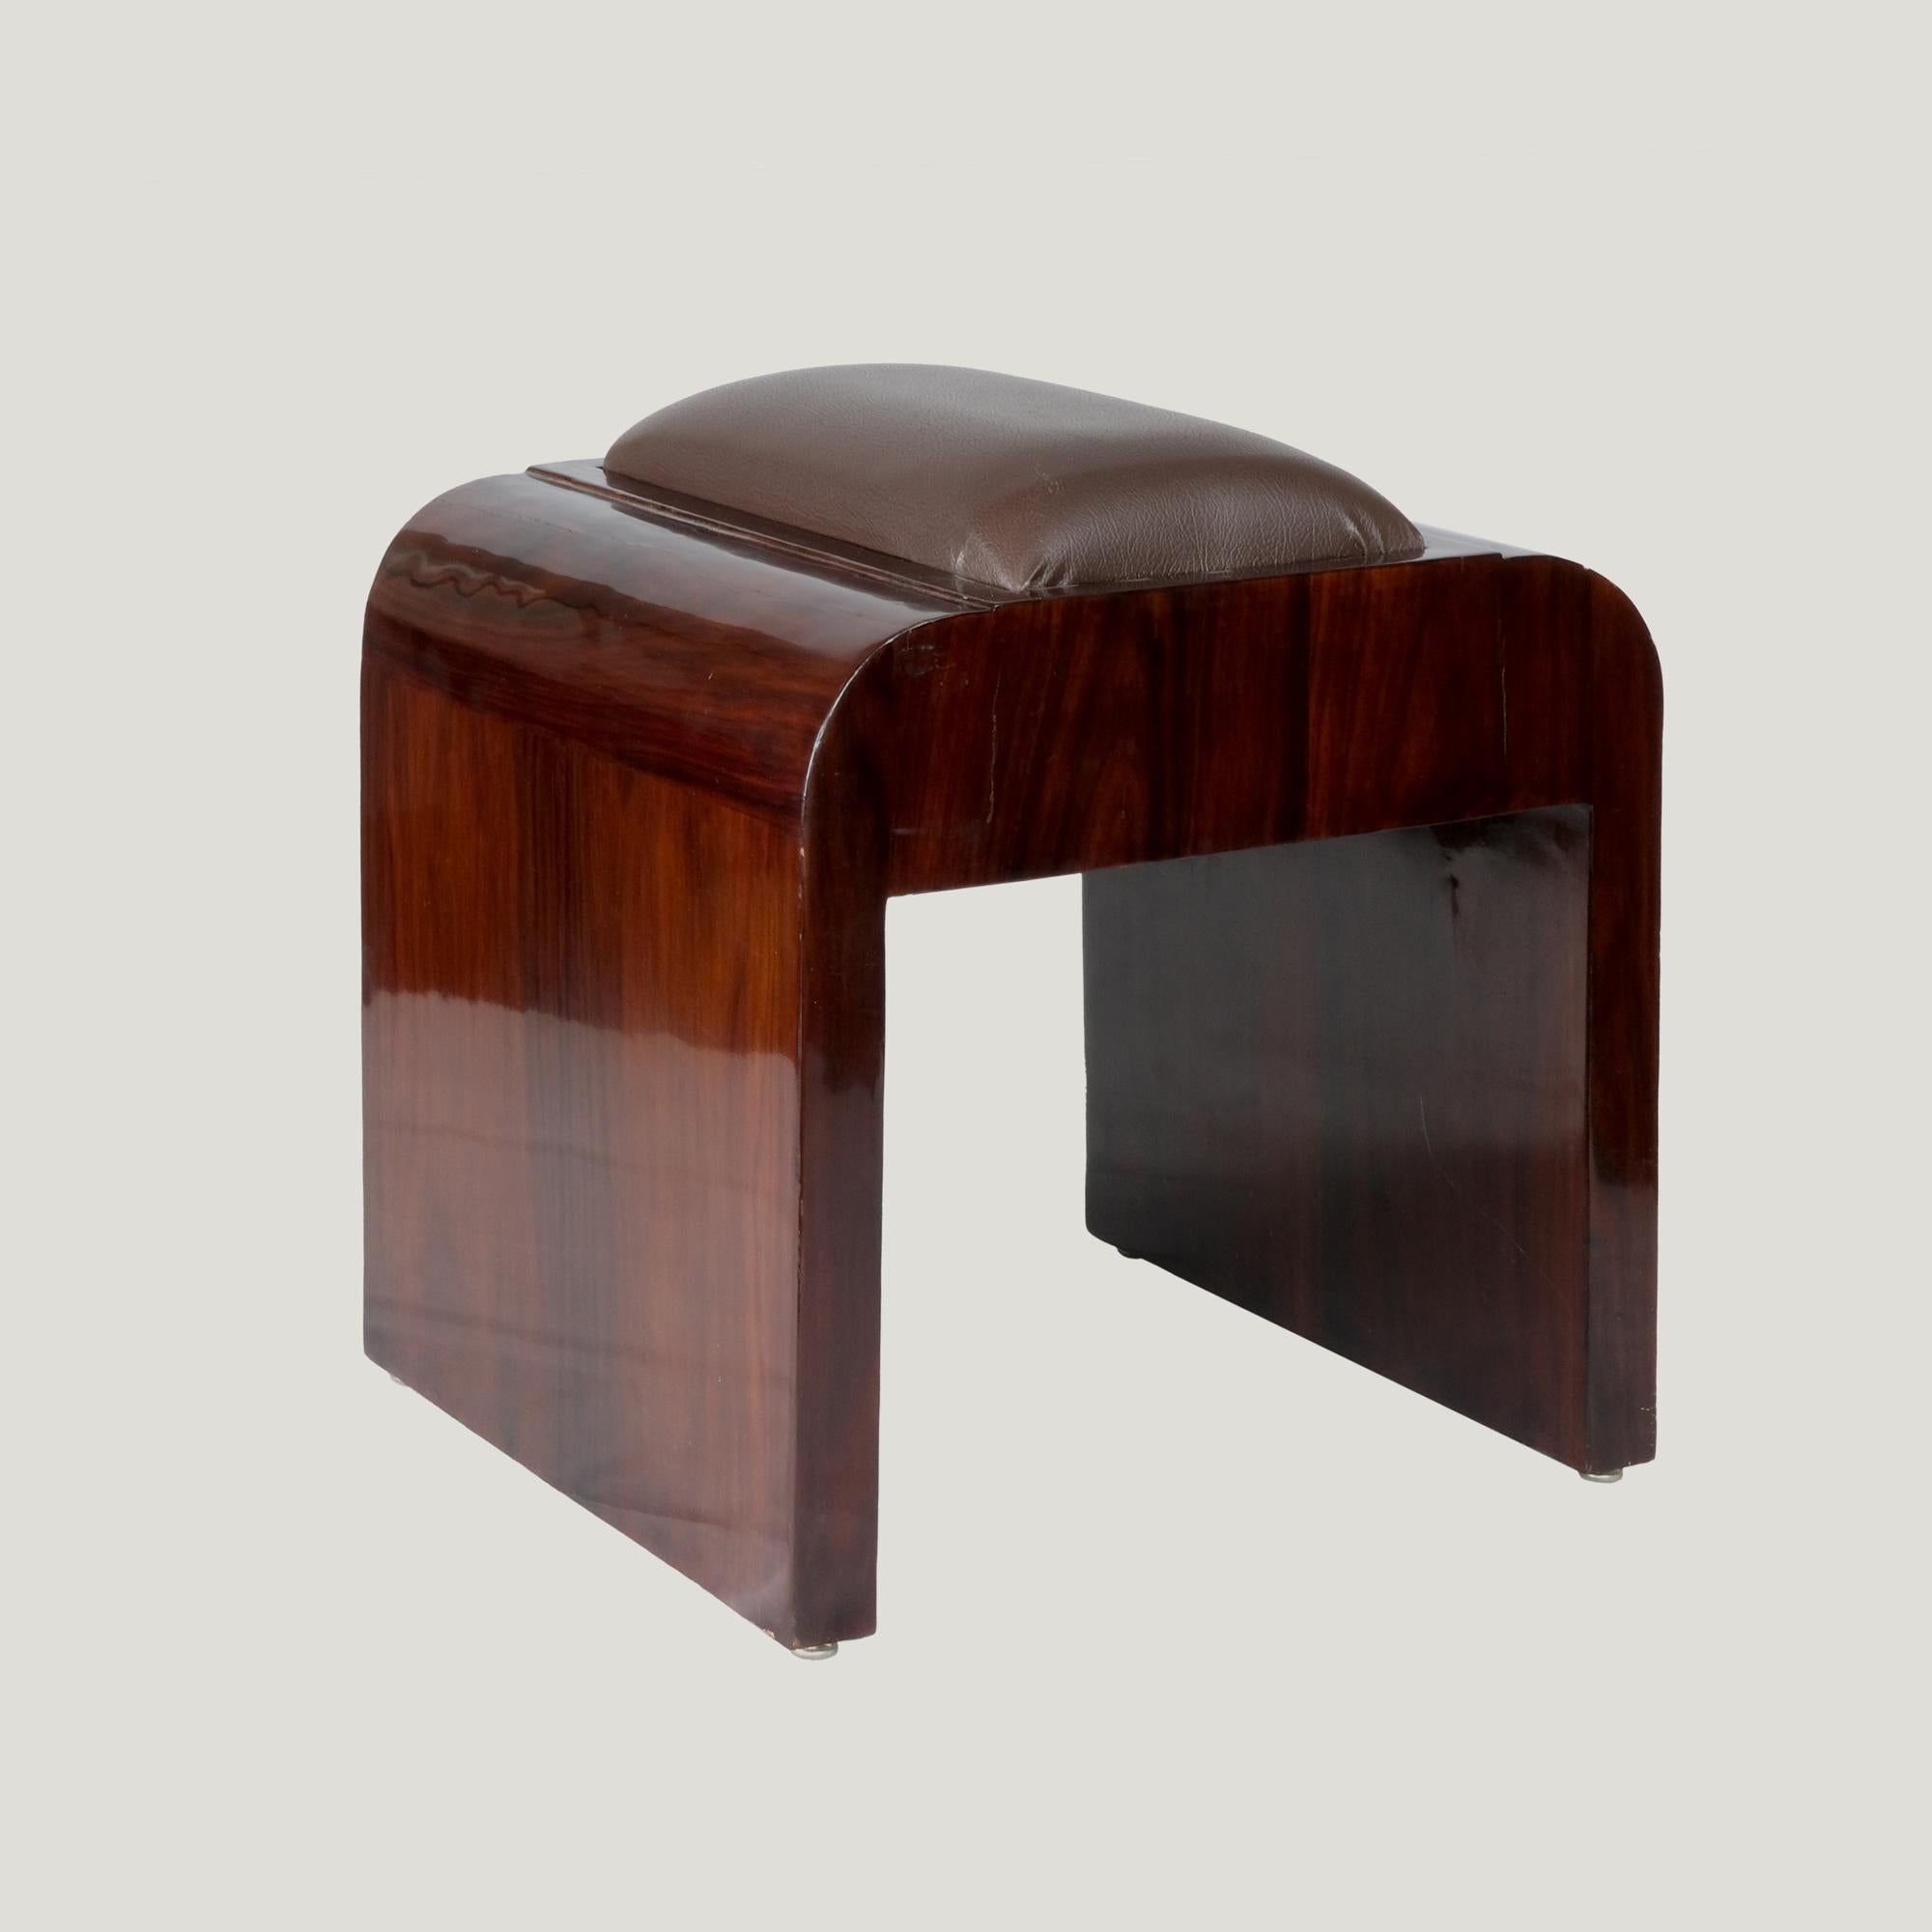 French Four Art Deco stools from 1921, mahogany veneered wood trimmed with leather. For Sale